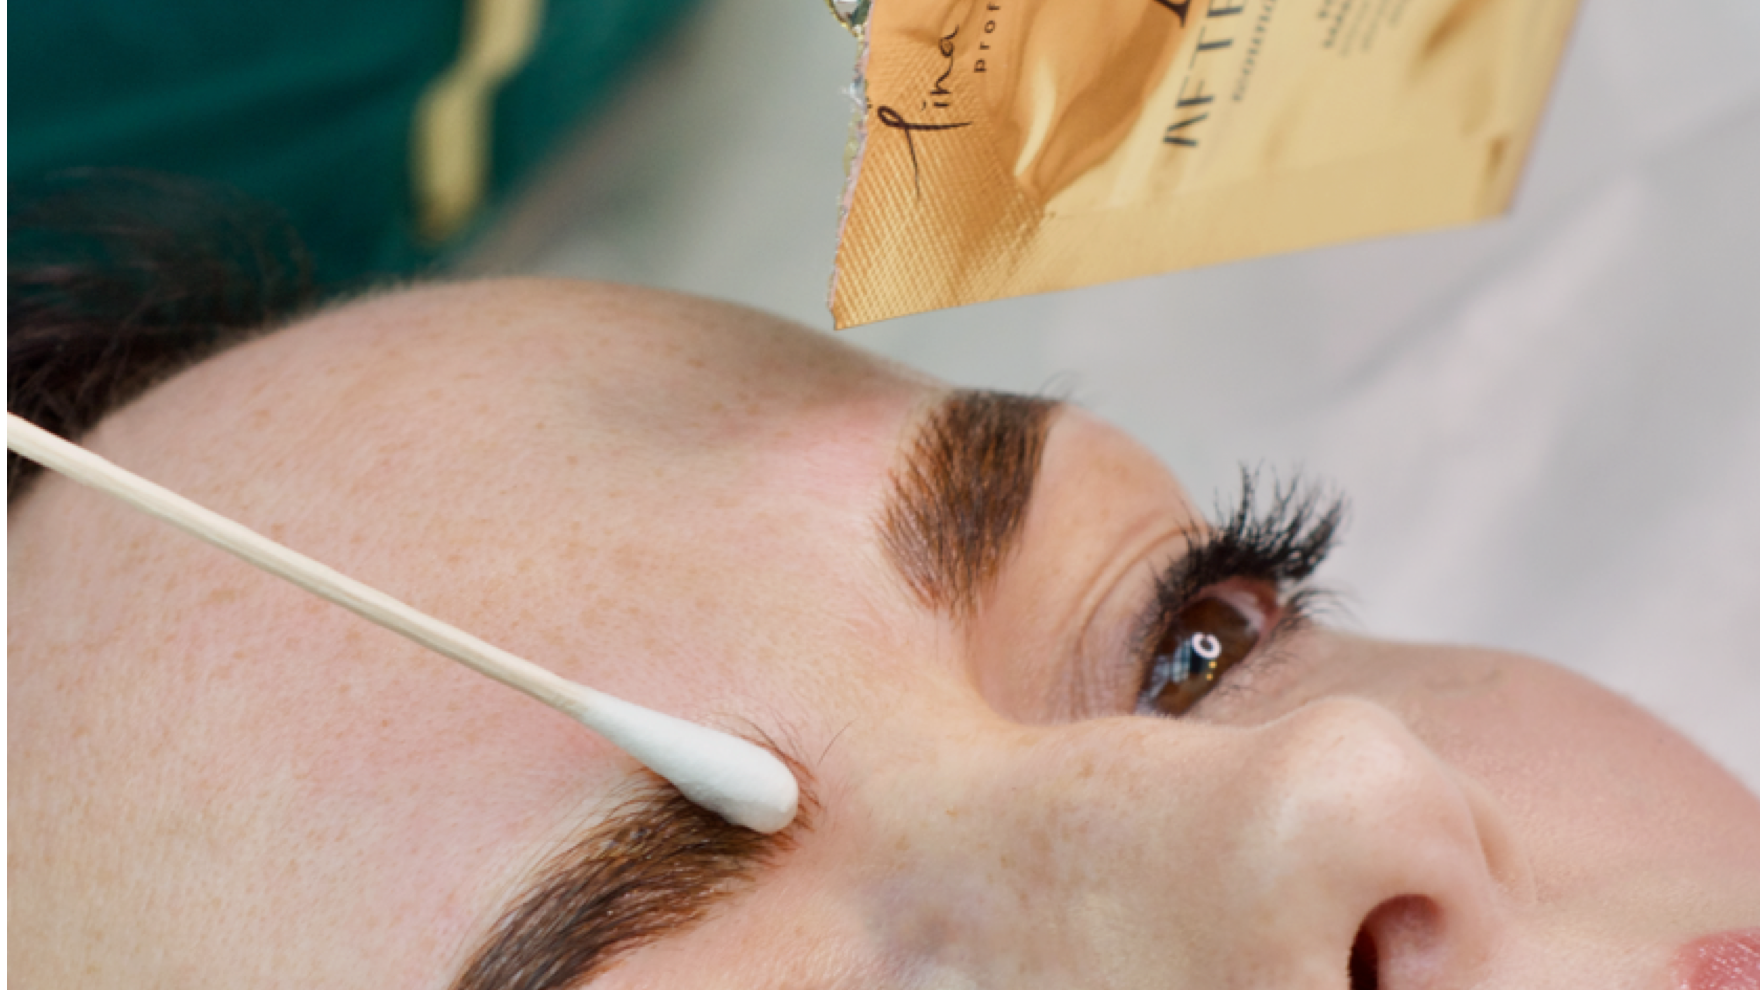 Eyebrow Permanent Makeup Aftercare - The Do's and Don'ts after PMU –  ADOREYES